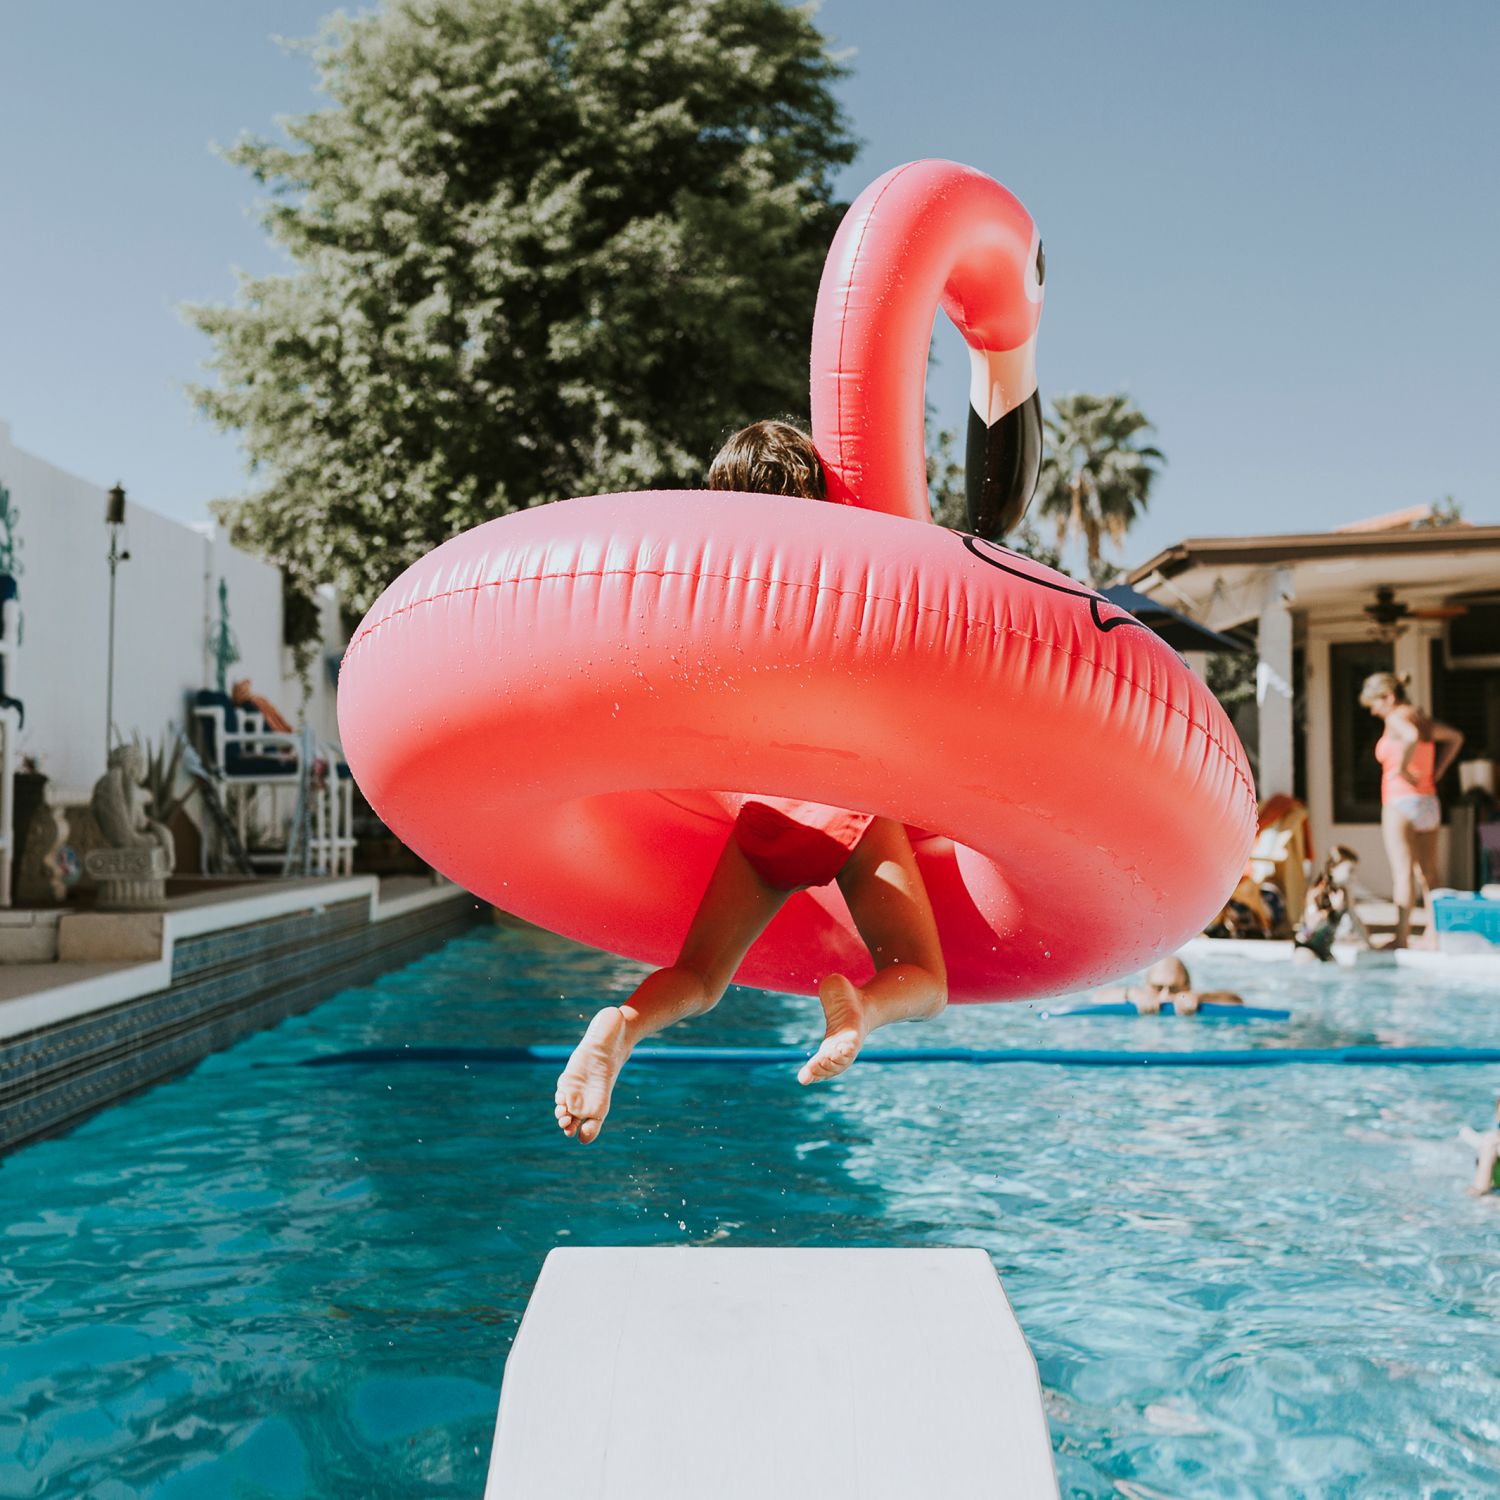 Rear view of girl jumping with a plastic flamingo into pool